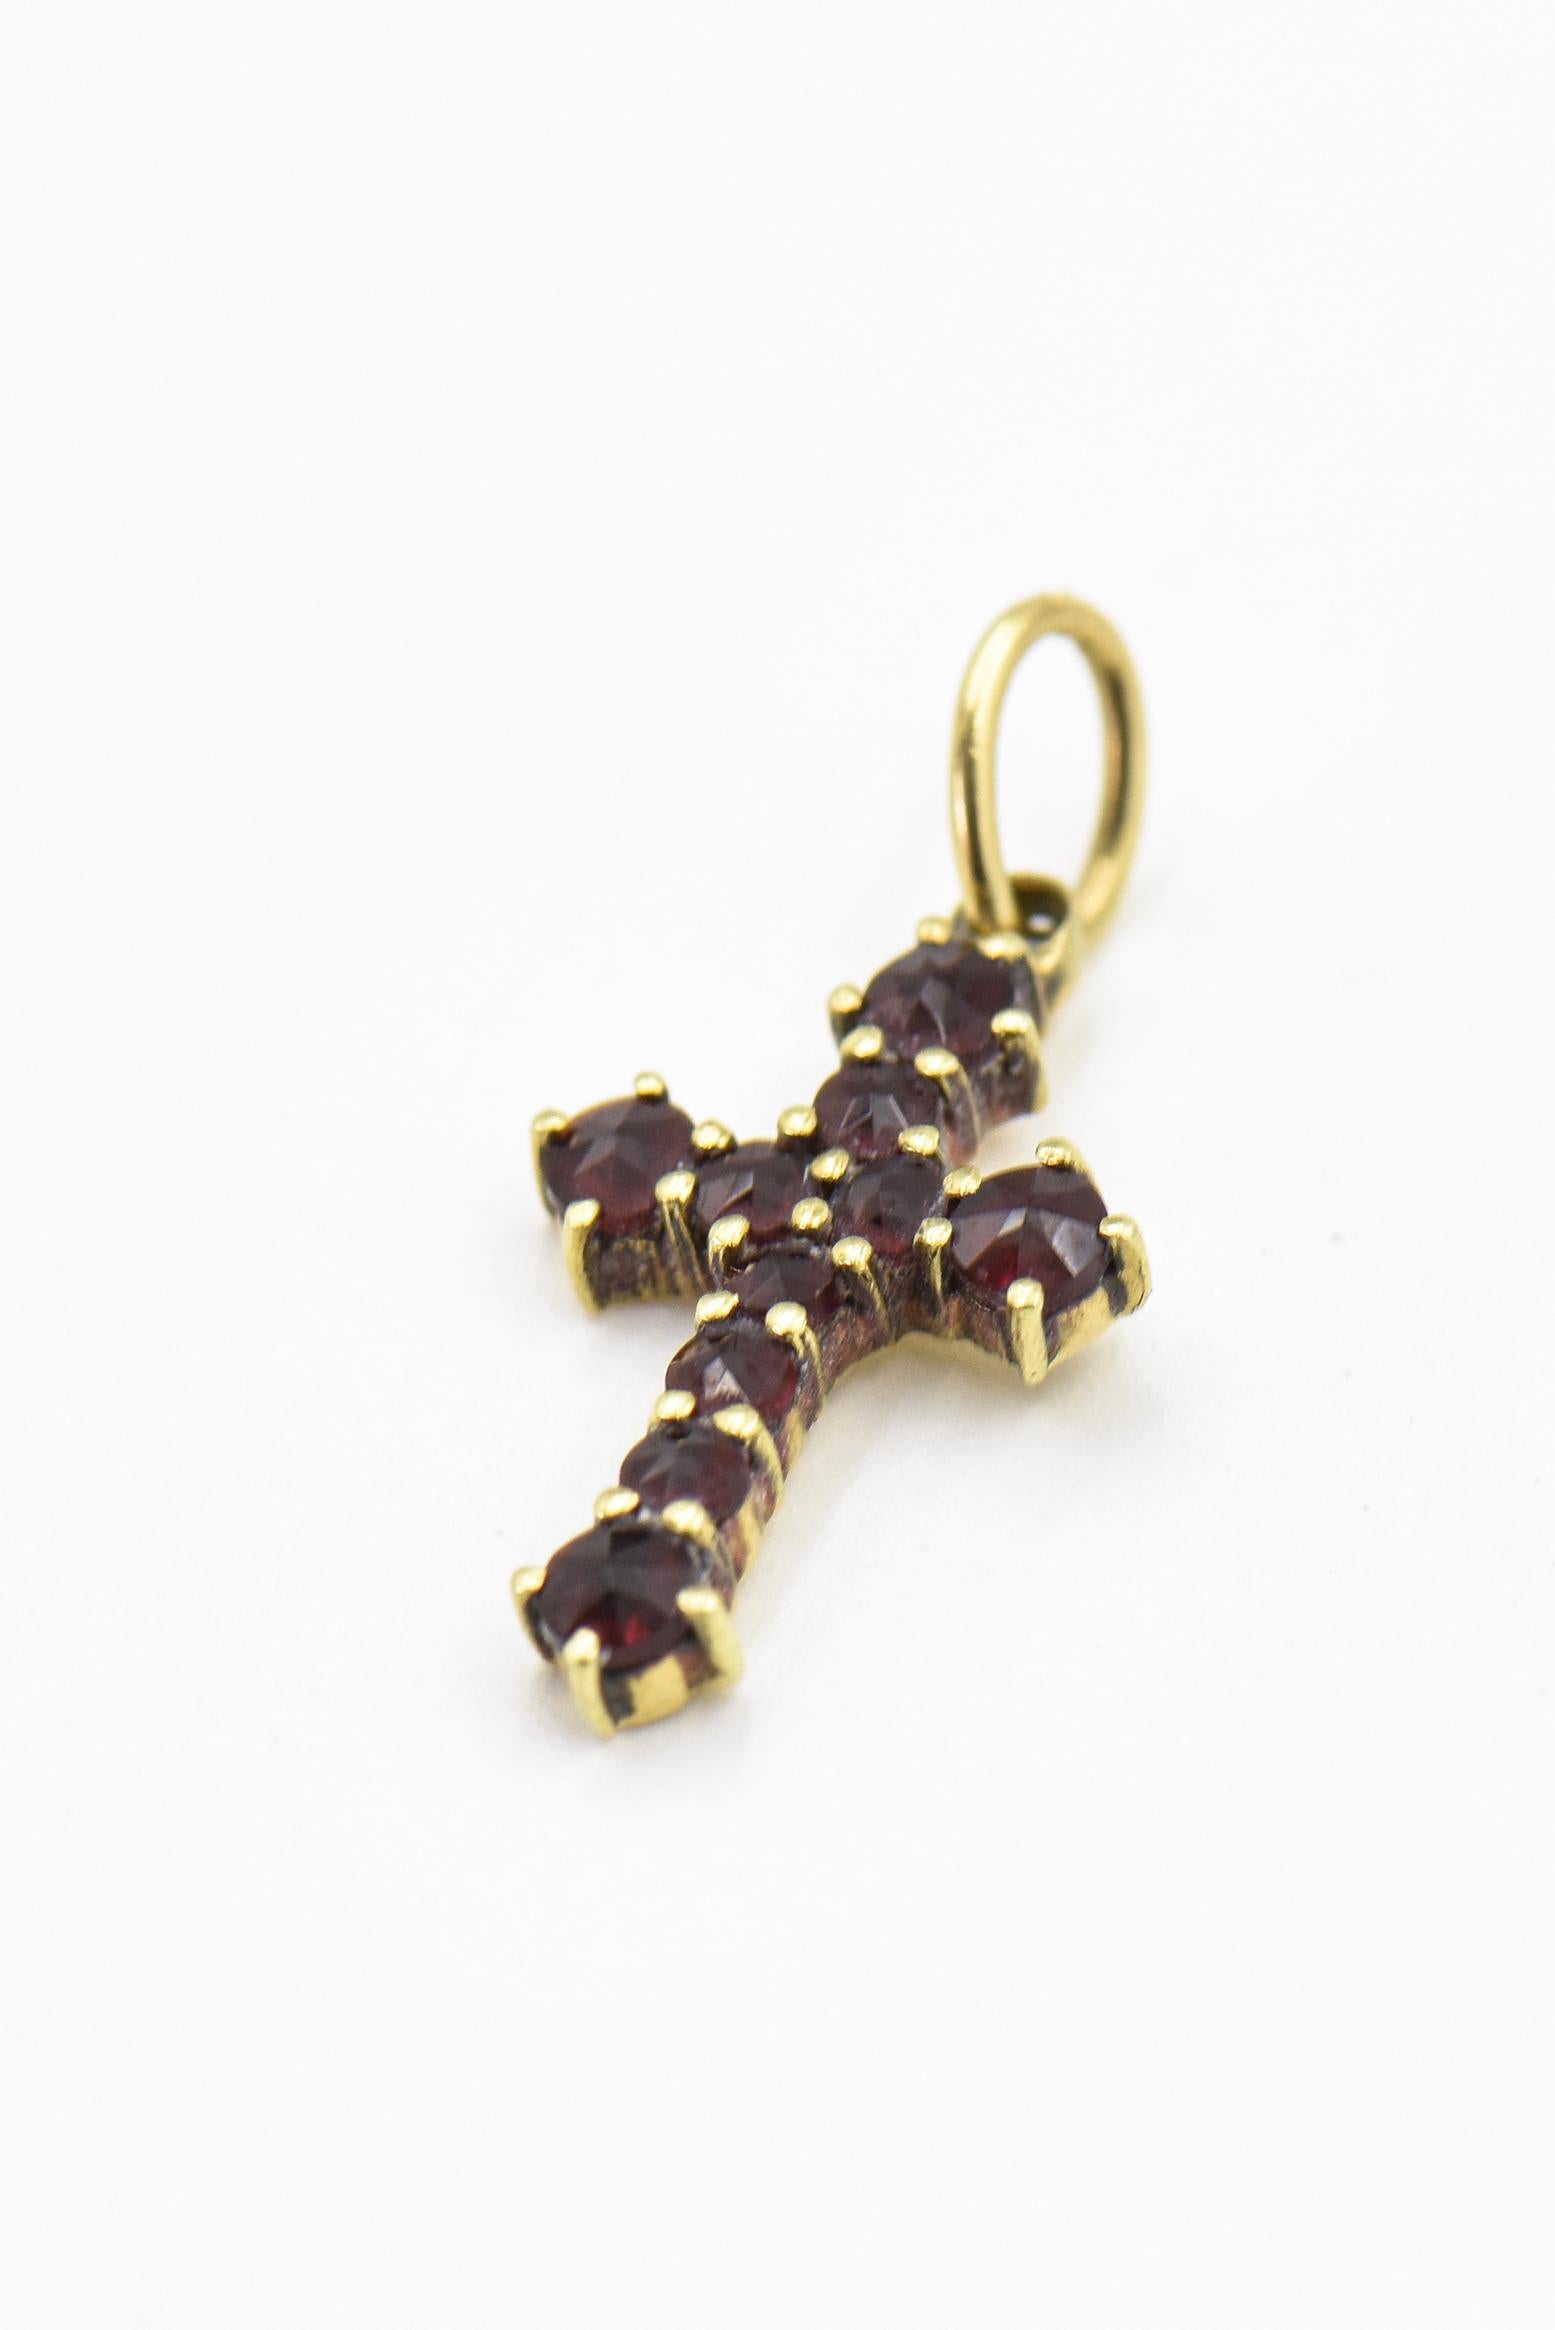 Sweet  18k yellow gold cross featuring 10 prong set faceted garnets.  Tests 18k with acid and gun - unmarked.  The loop hole is 4.35 mm x 2.89mm. Without the loop it is .60